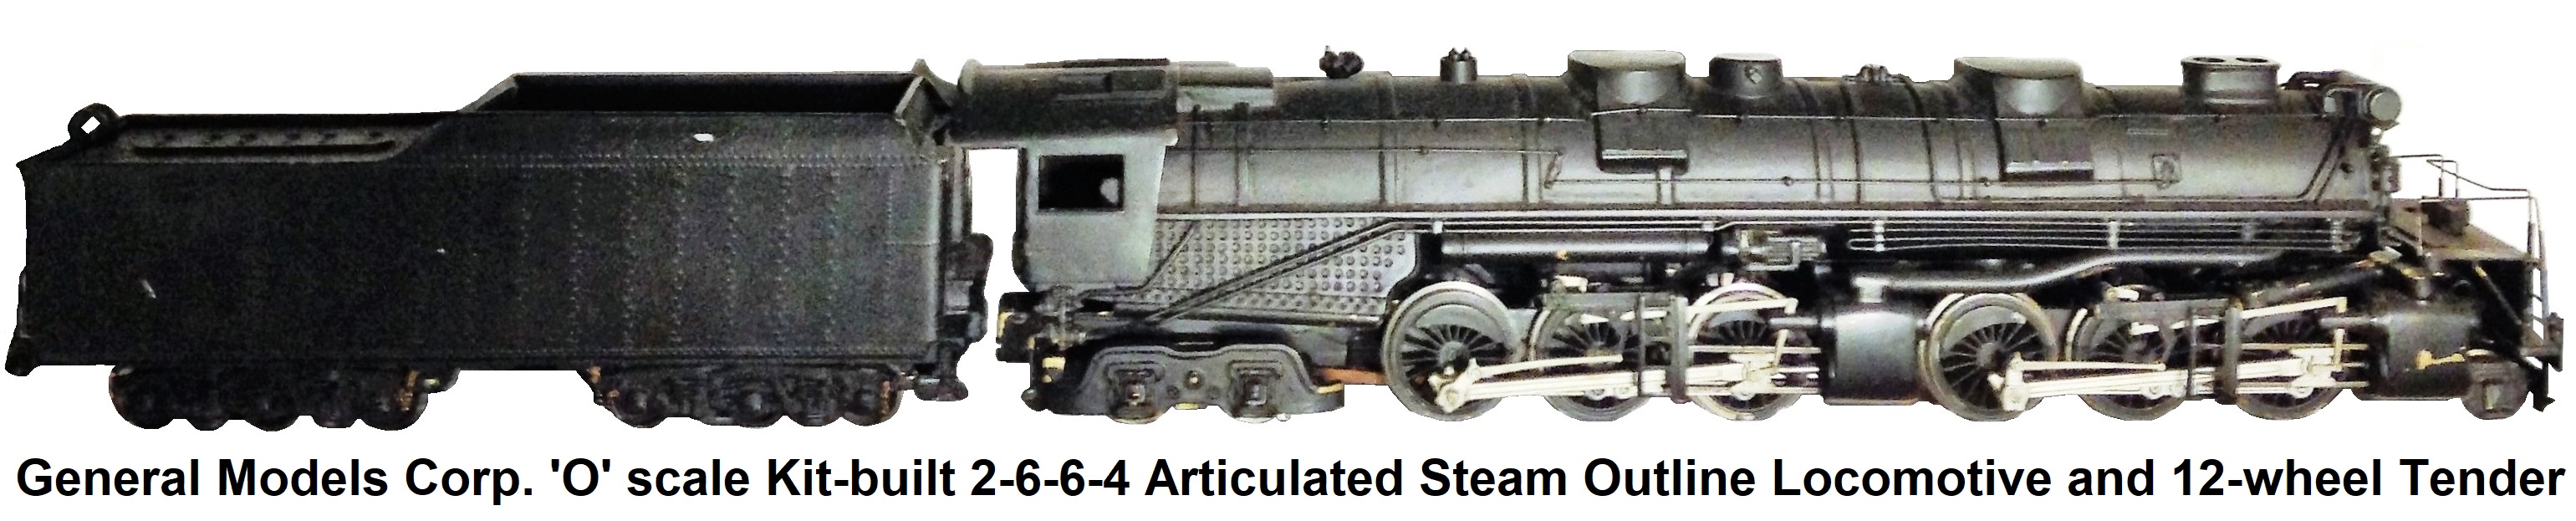 General Models Corp. 'O' scale Kit-built 2-6-6-4 Articulated loco and 12-wheel tender